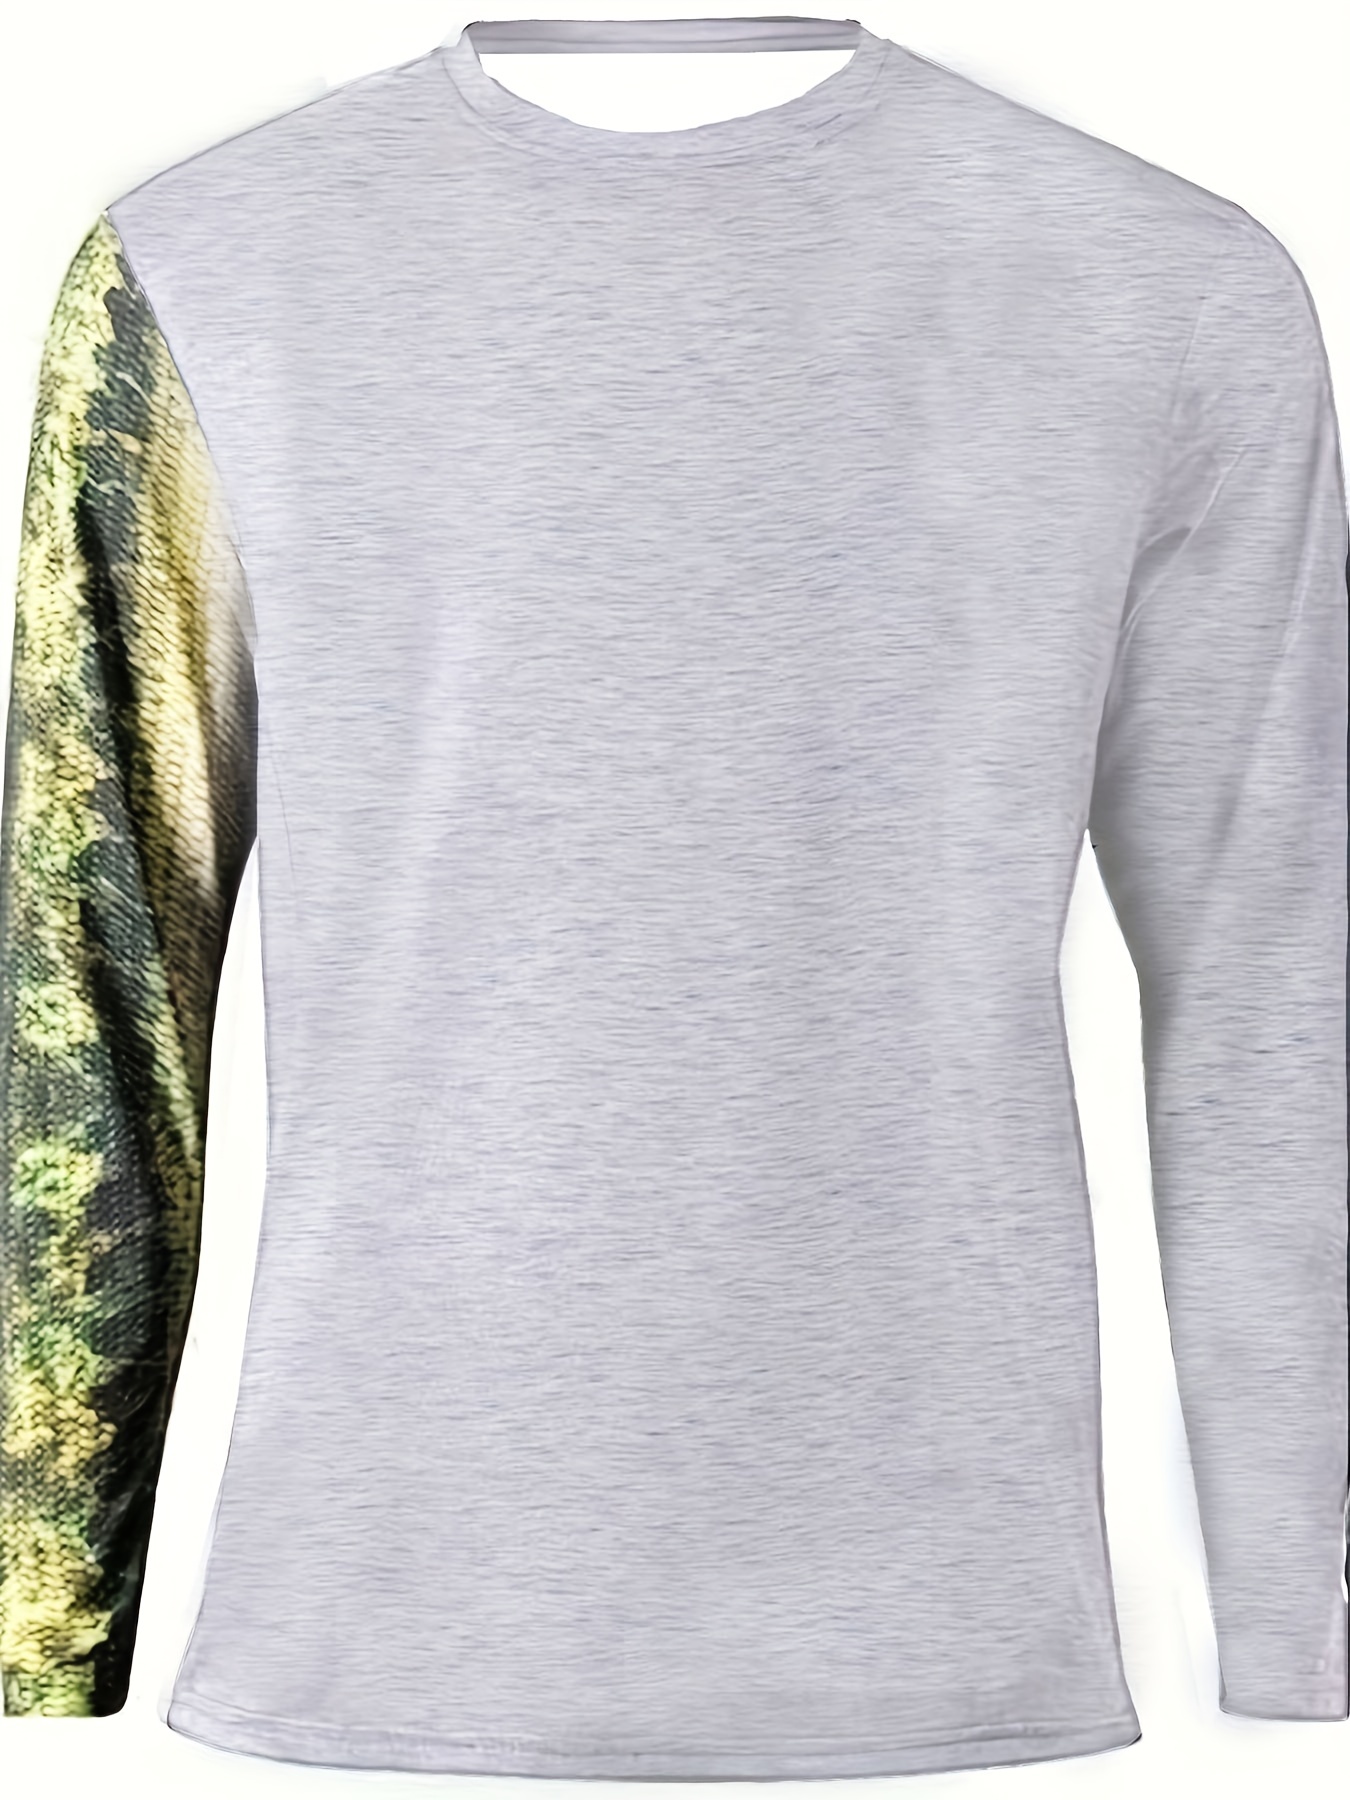 Long Sleeve Fishing Shirt For Men, Novelty Pjs Tops Pullovers, Fashion  Round Neck Tops, Men's Clothing